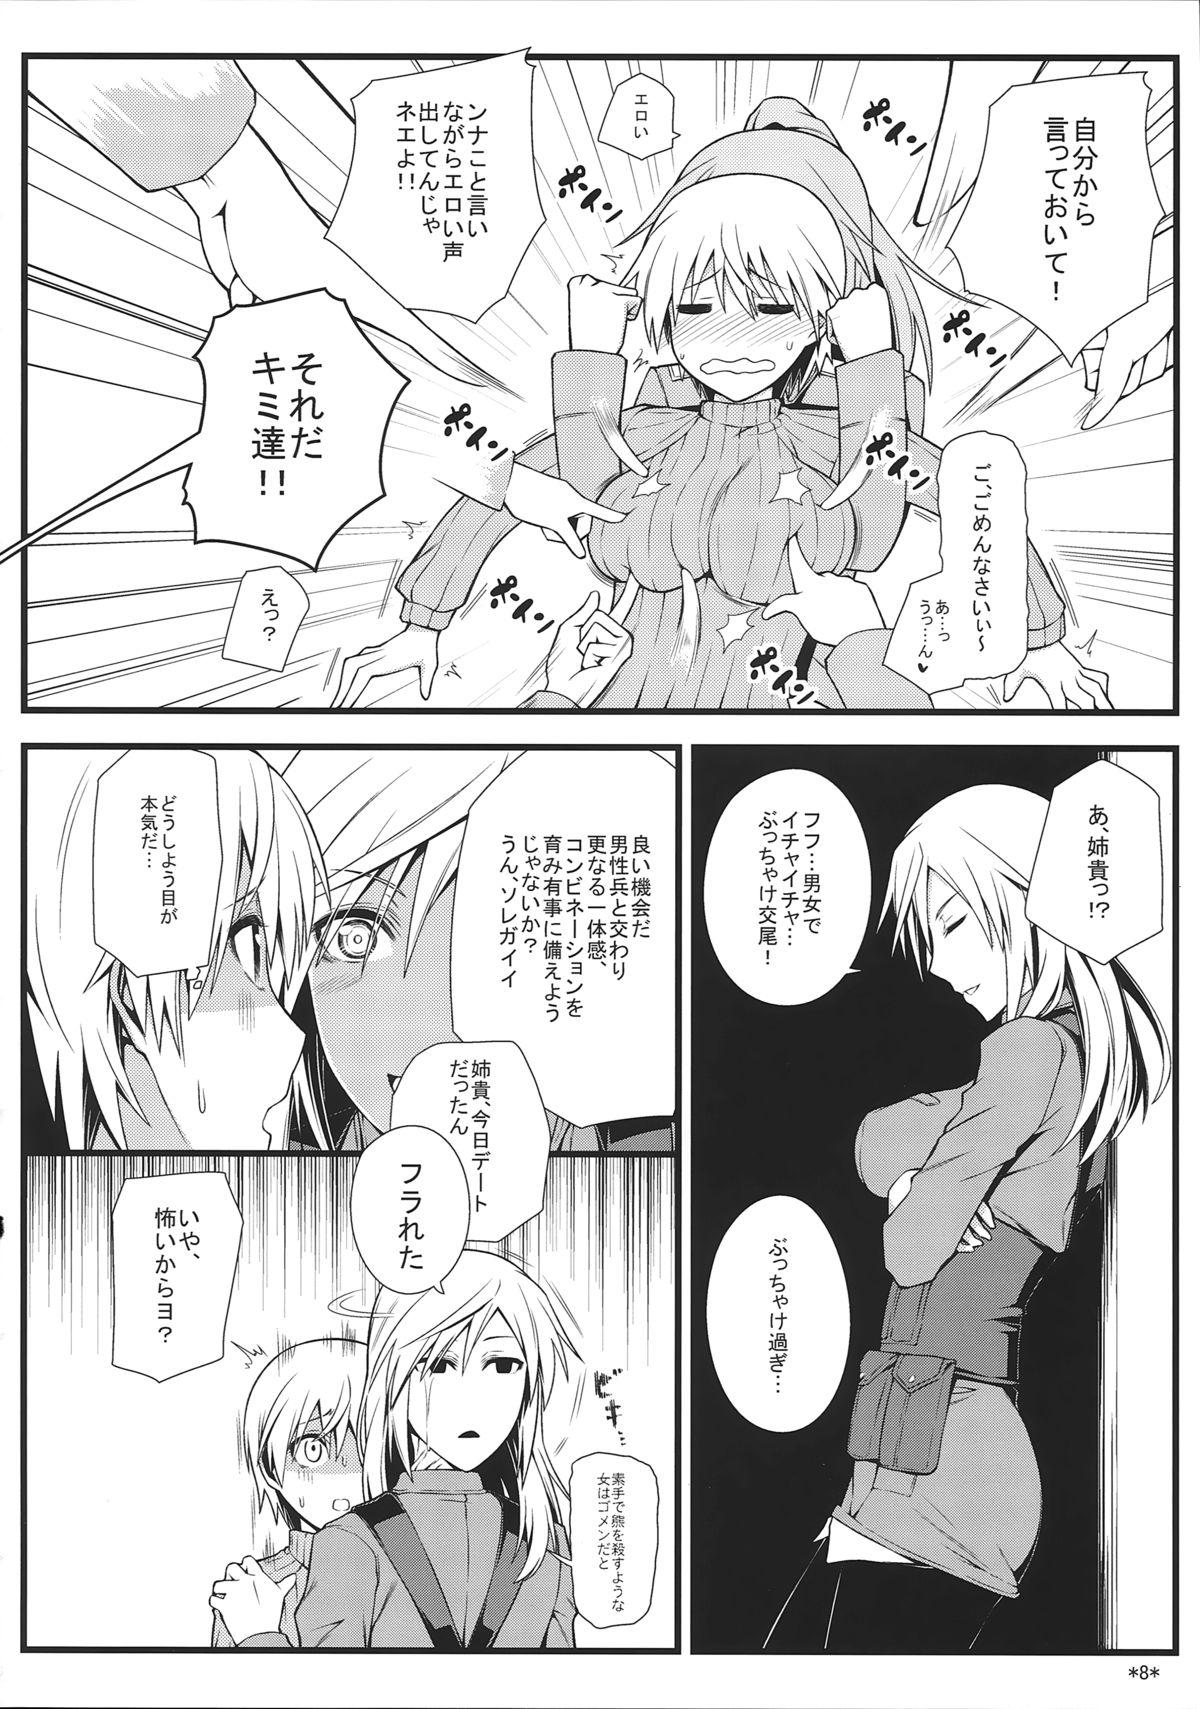 Fuck KARLSLAND SYNDROME 3 - Strike witches Chunky - Page 10